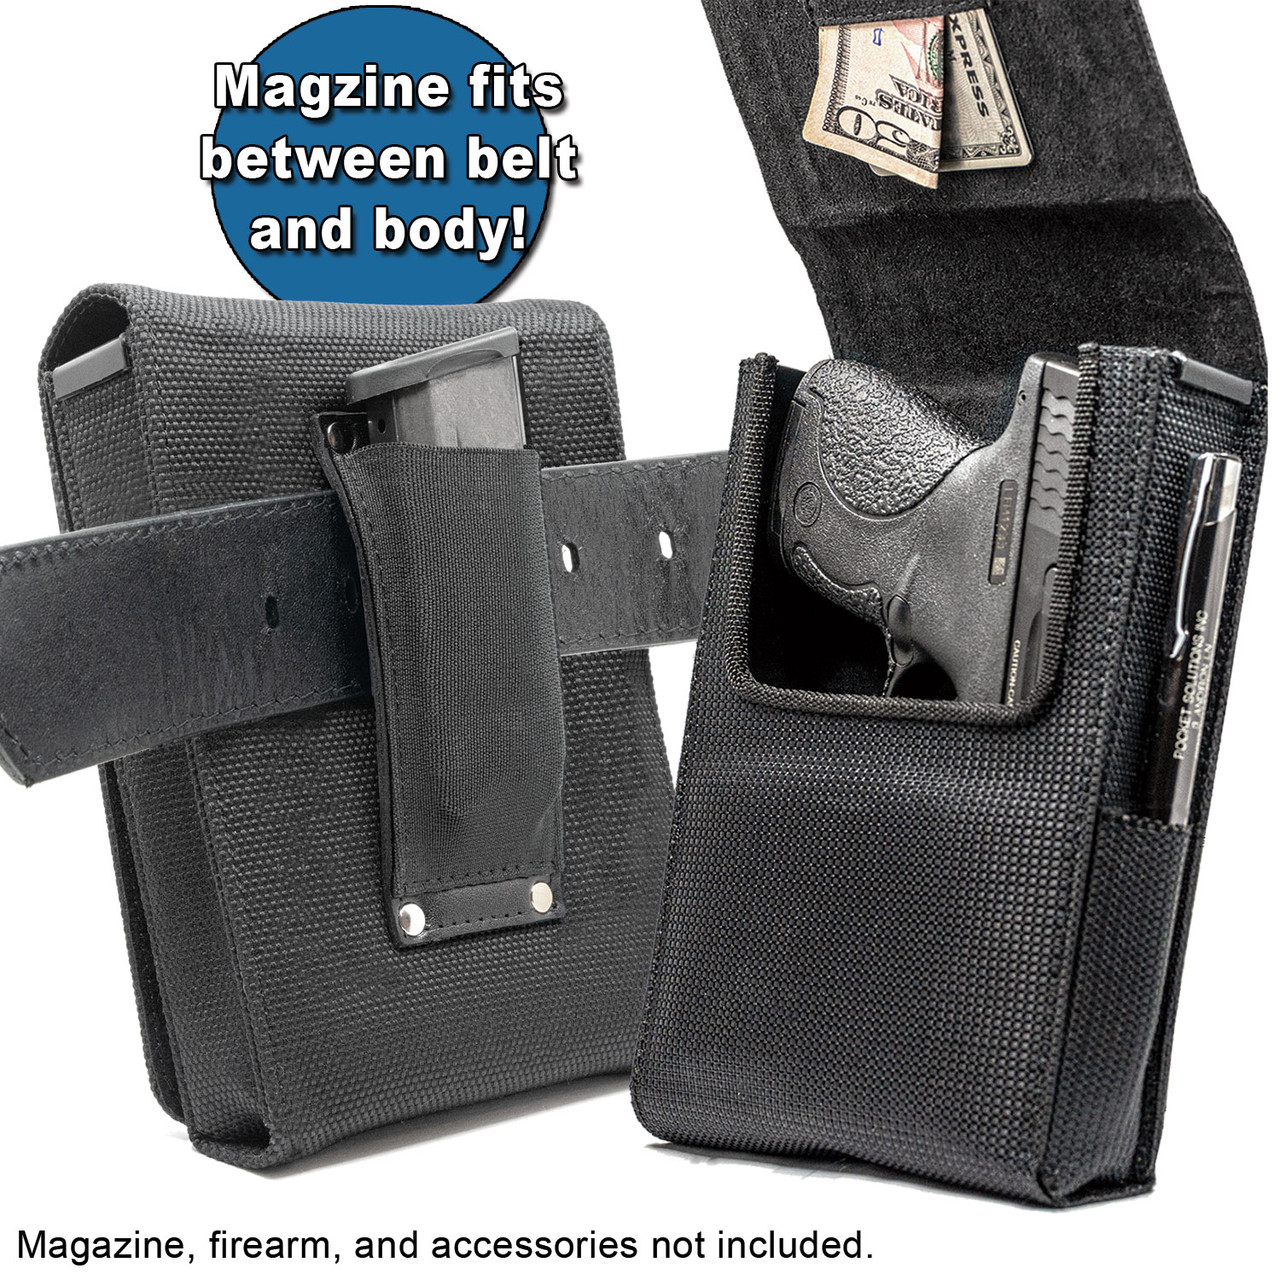 The Ruger EC9s Max Defense Holster